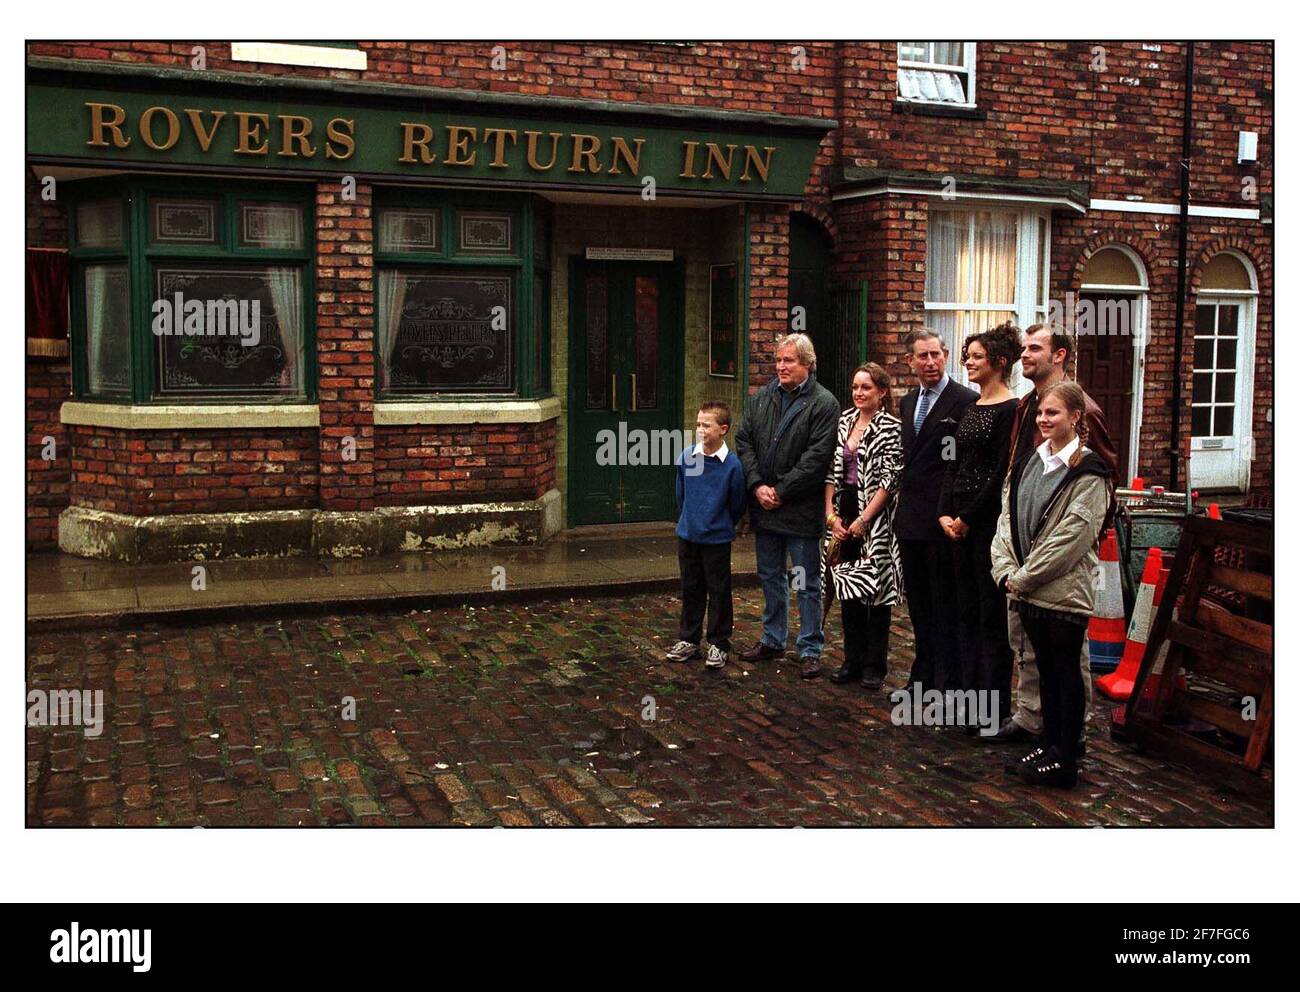 H.R.H. The Prince of Wales today visited the set of Coronation Street to mark the occasion of the programs 40th anniversary. H.R.H. took part in celebrations and met cast and crew as they prepare for tonights historic live episode. The cast were Ken Barlow (William Roache) Linda Baldwin(Jacquline Pirie) young David Platt(Jack P Shepherd) Geena Gregory(Jennifer James) Sarah Platt(Tina O'Brien) and Steve Mc Donald(Simon Gregson)pic David Sandison 8/12/2000 Stock Photo